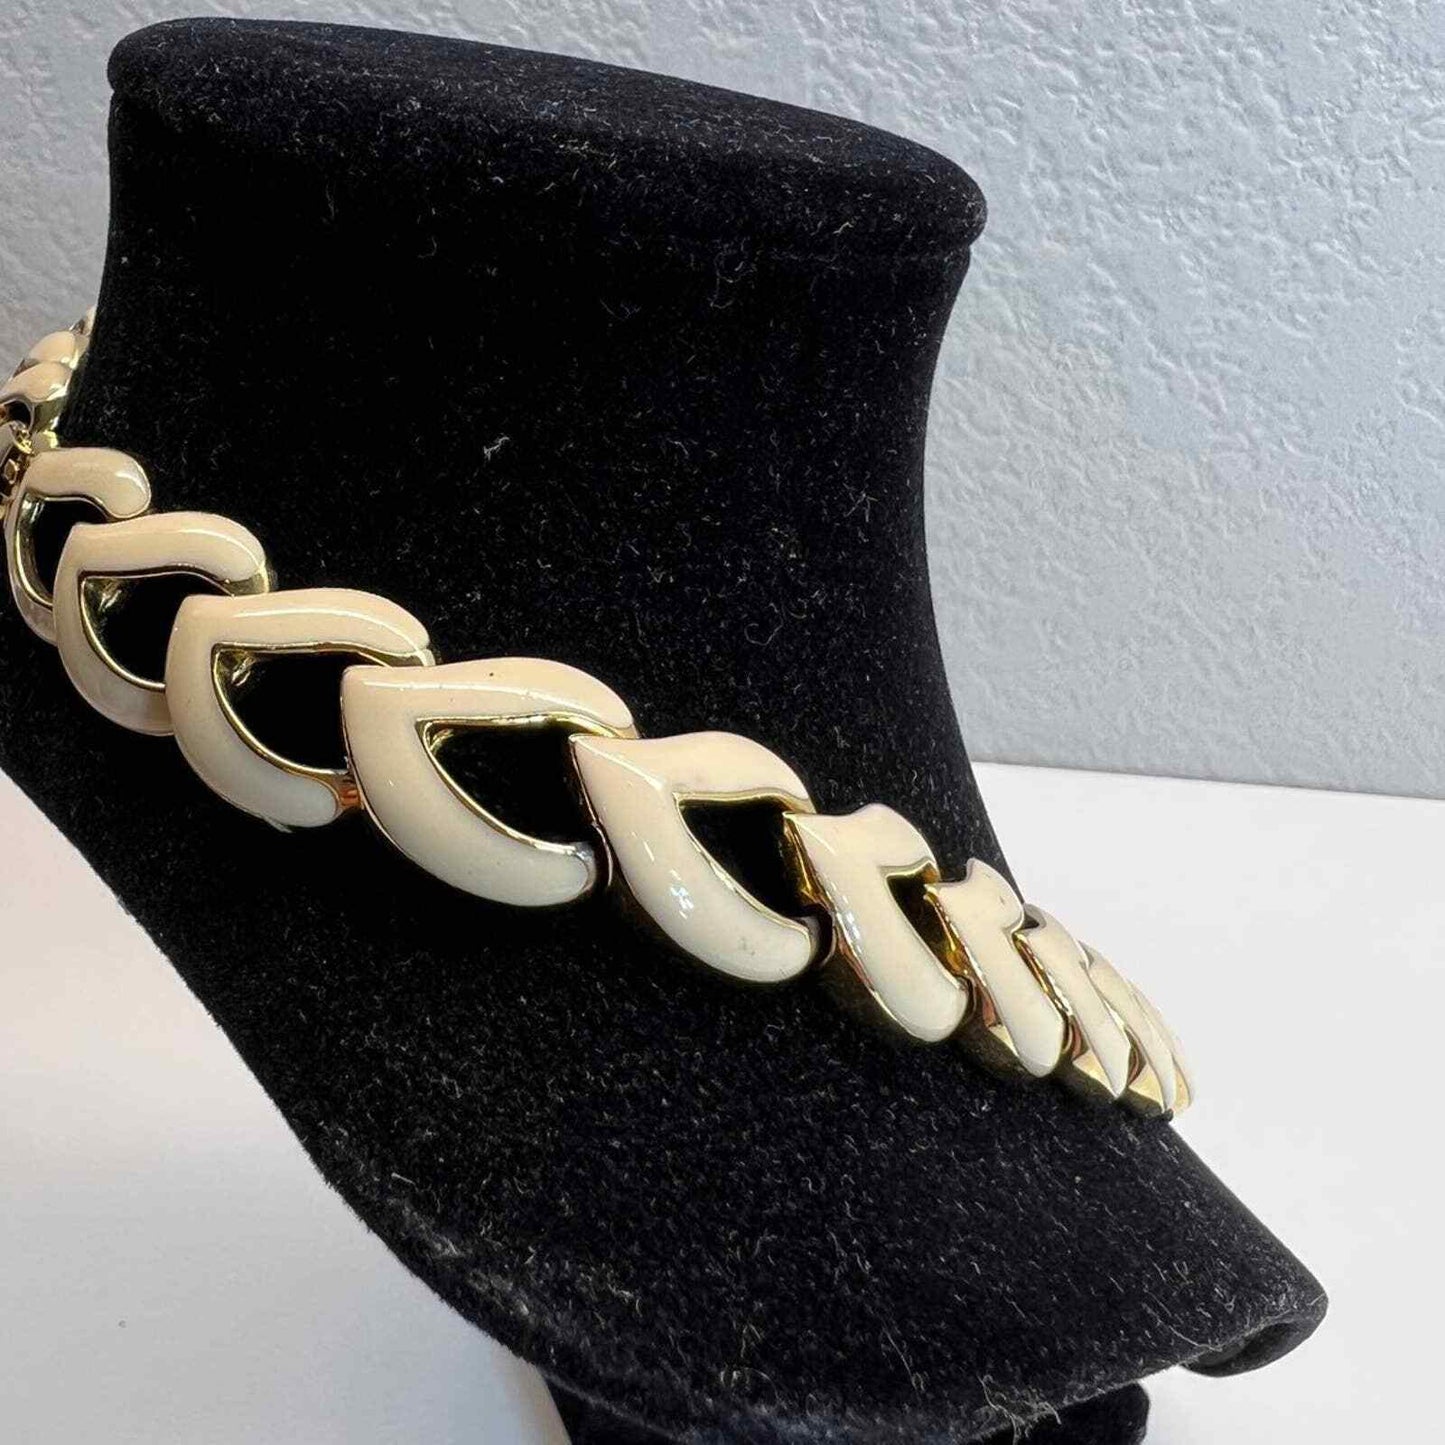 Necklace Costume Jewelry Chain Cream Enamel Gold Plated Statement 1980s Vintage